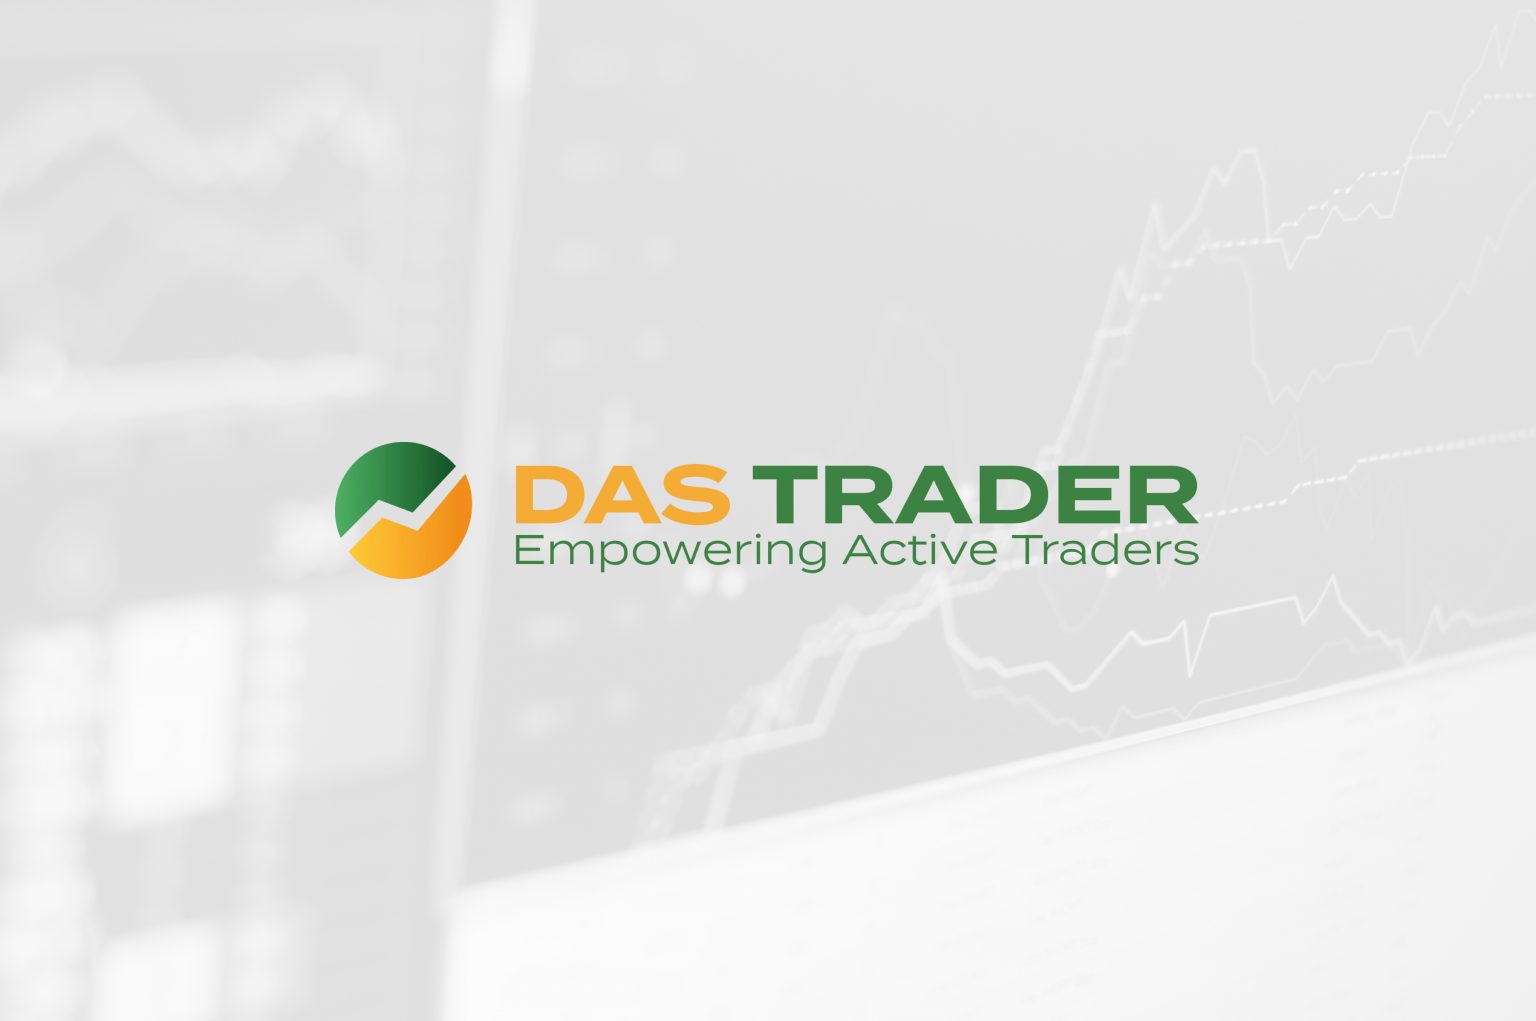 Auto-import from DAS Trader now available - Tradervue